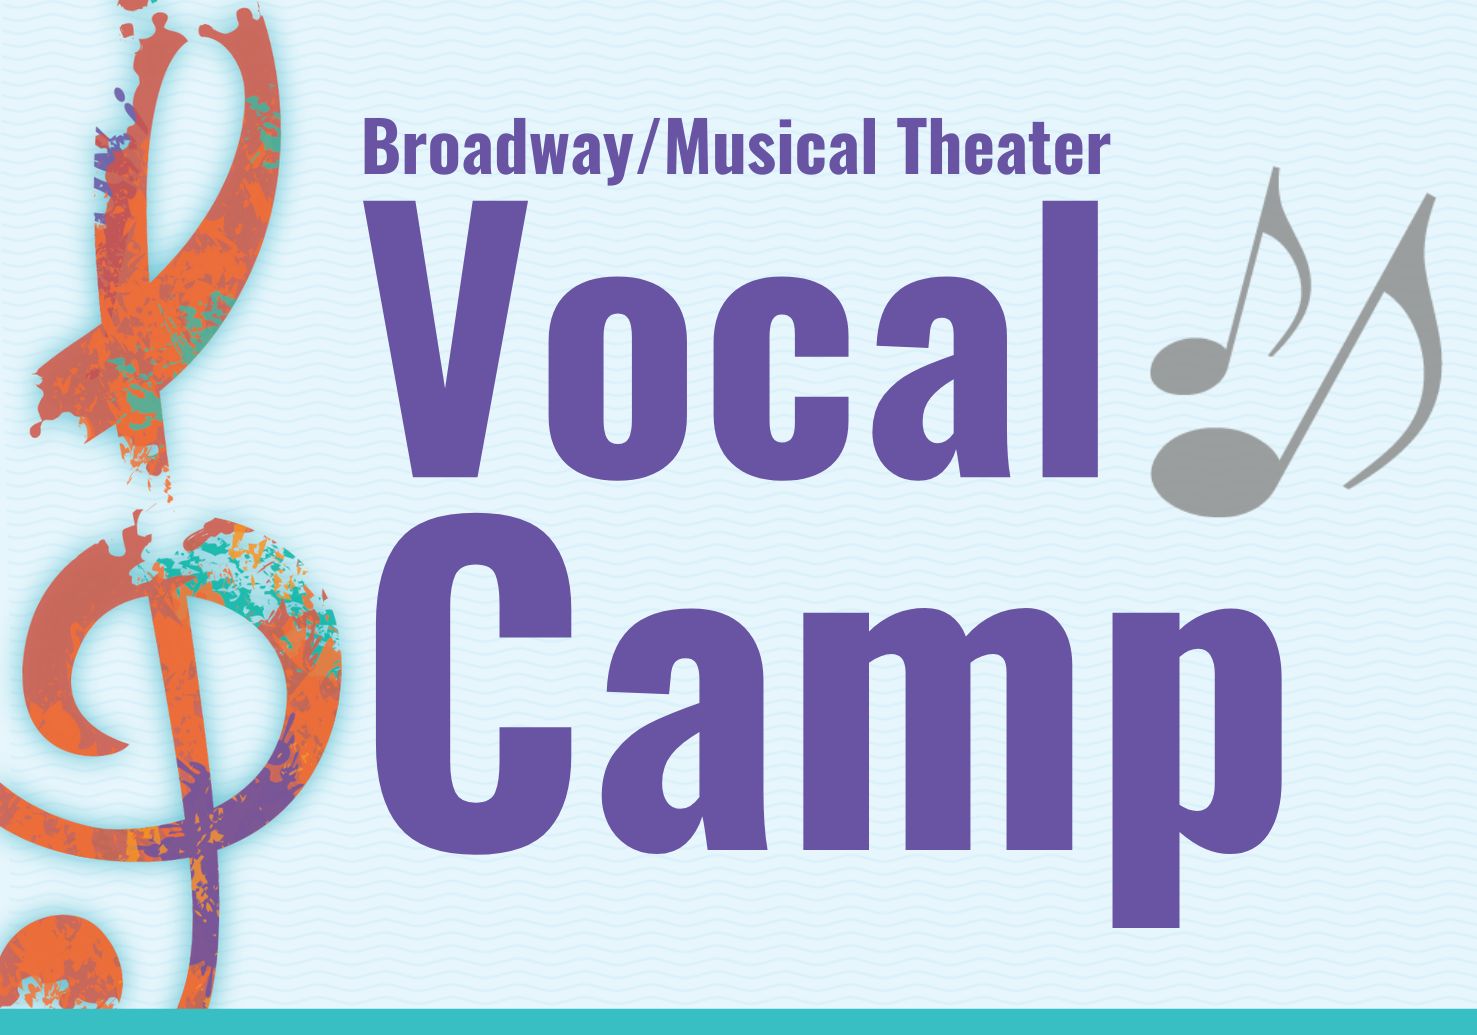 Broadway/Musical Theater Vocal Camp tampa music school carrollwood